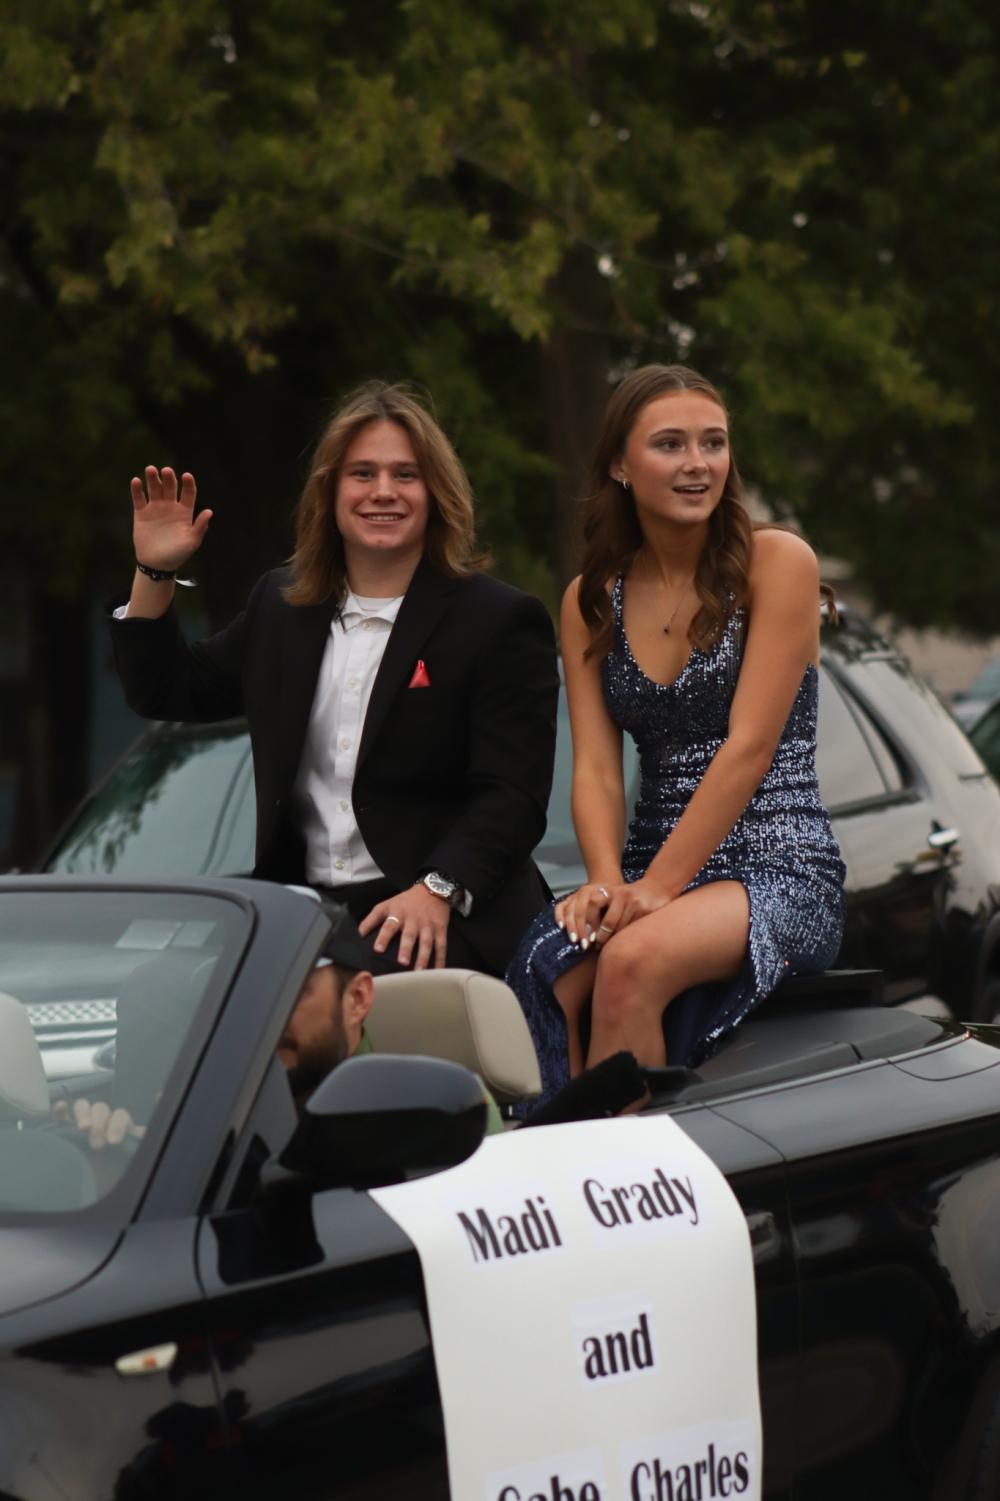 Homecoming+Parade+%28Photos+by+Reese+Cowden%29